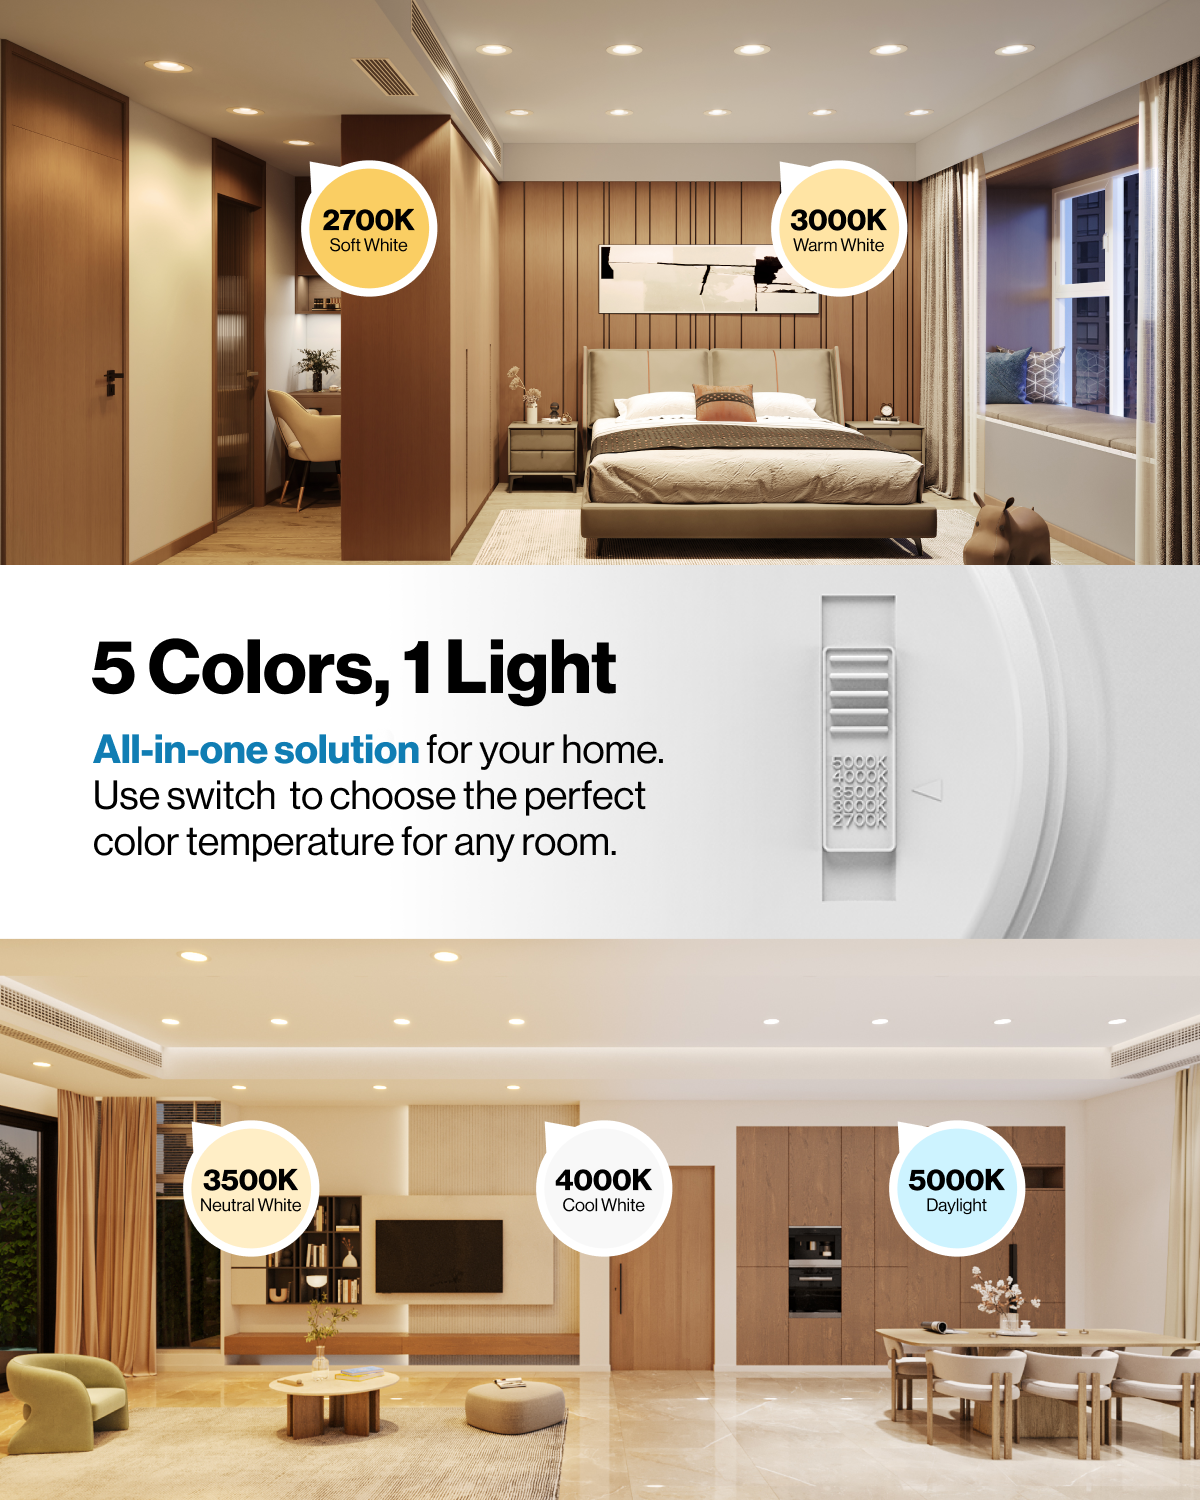 LED Recessed Downlight - 6-Inch Color and Wattage Adjustable LED Downlight  Alternative for Recessed Lights - 100 LPW - Energy-Efficient, Dimmable